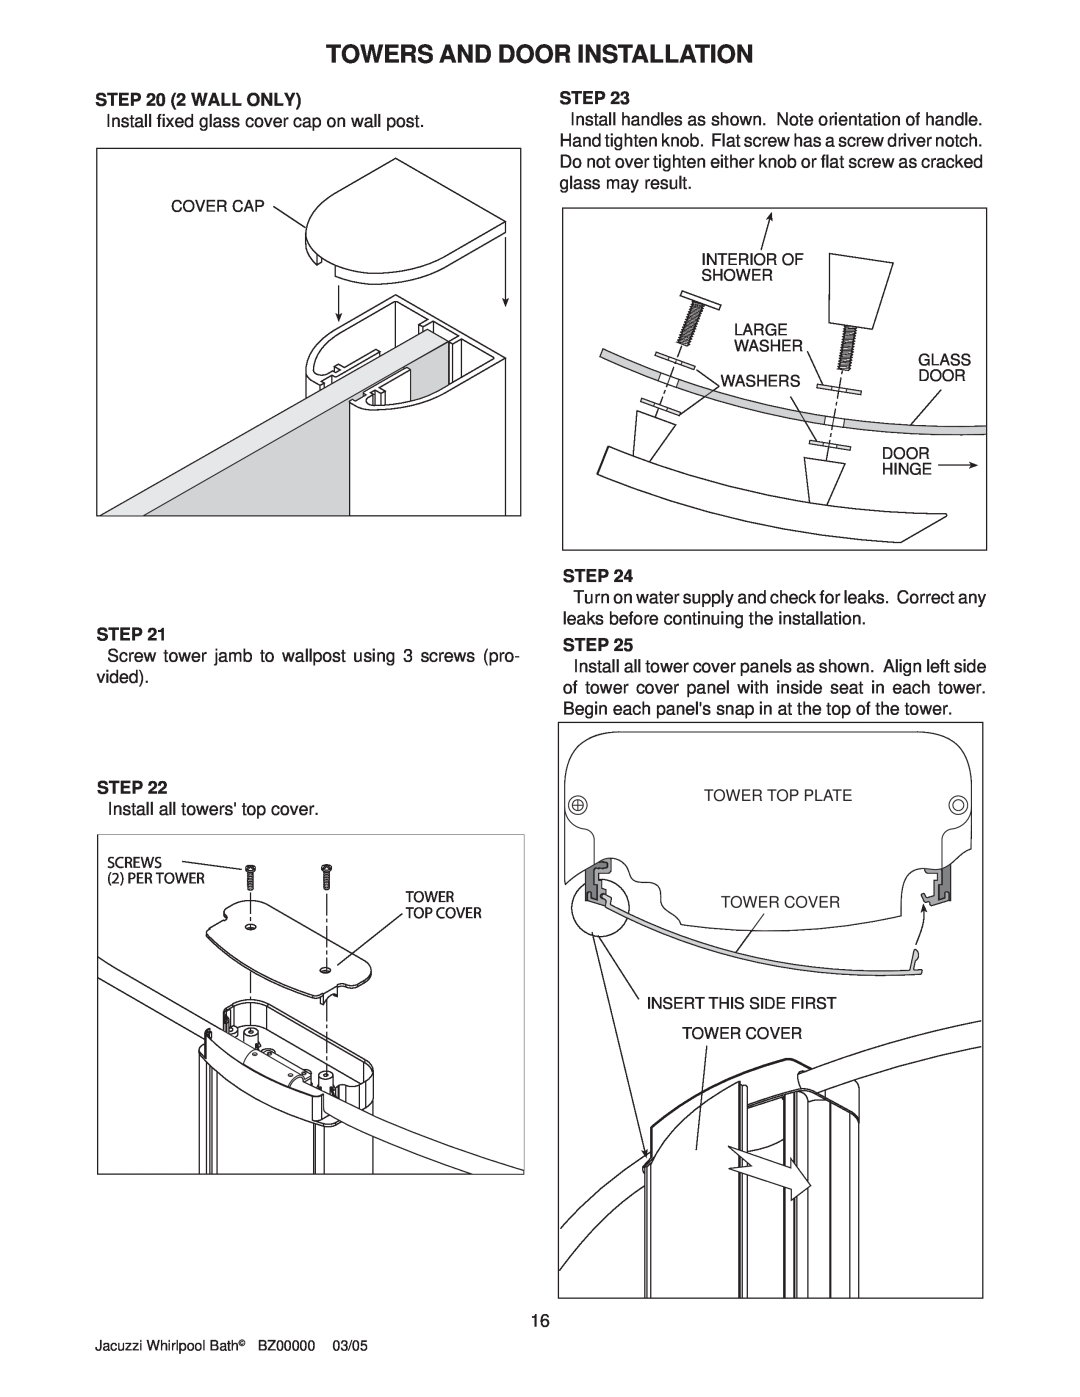 Jacuzzi BZ00000 operating instructions Towers And Door Installation, 2 WALL ONLY, Step 